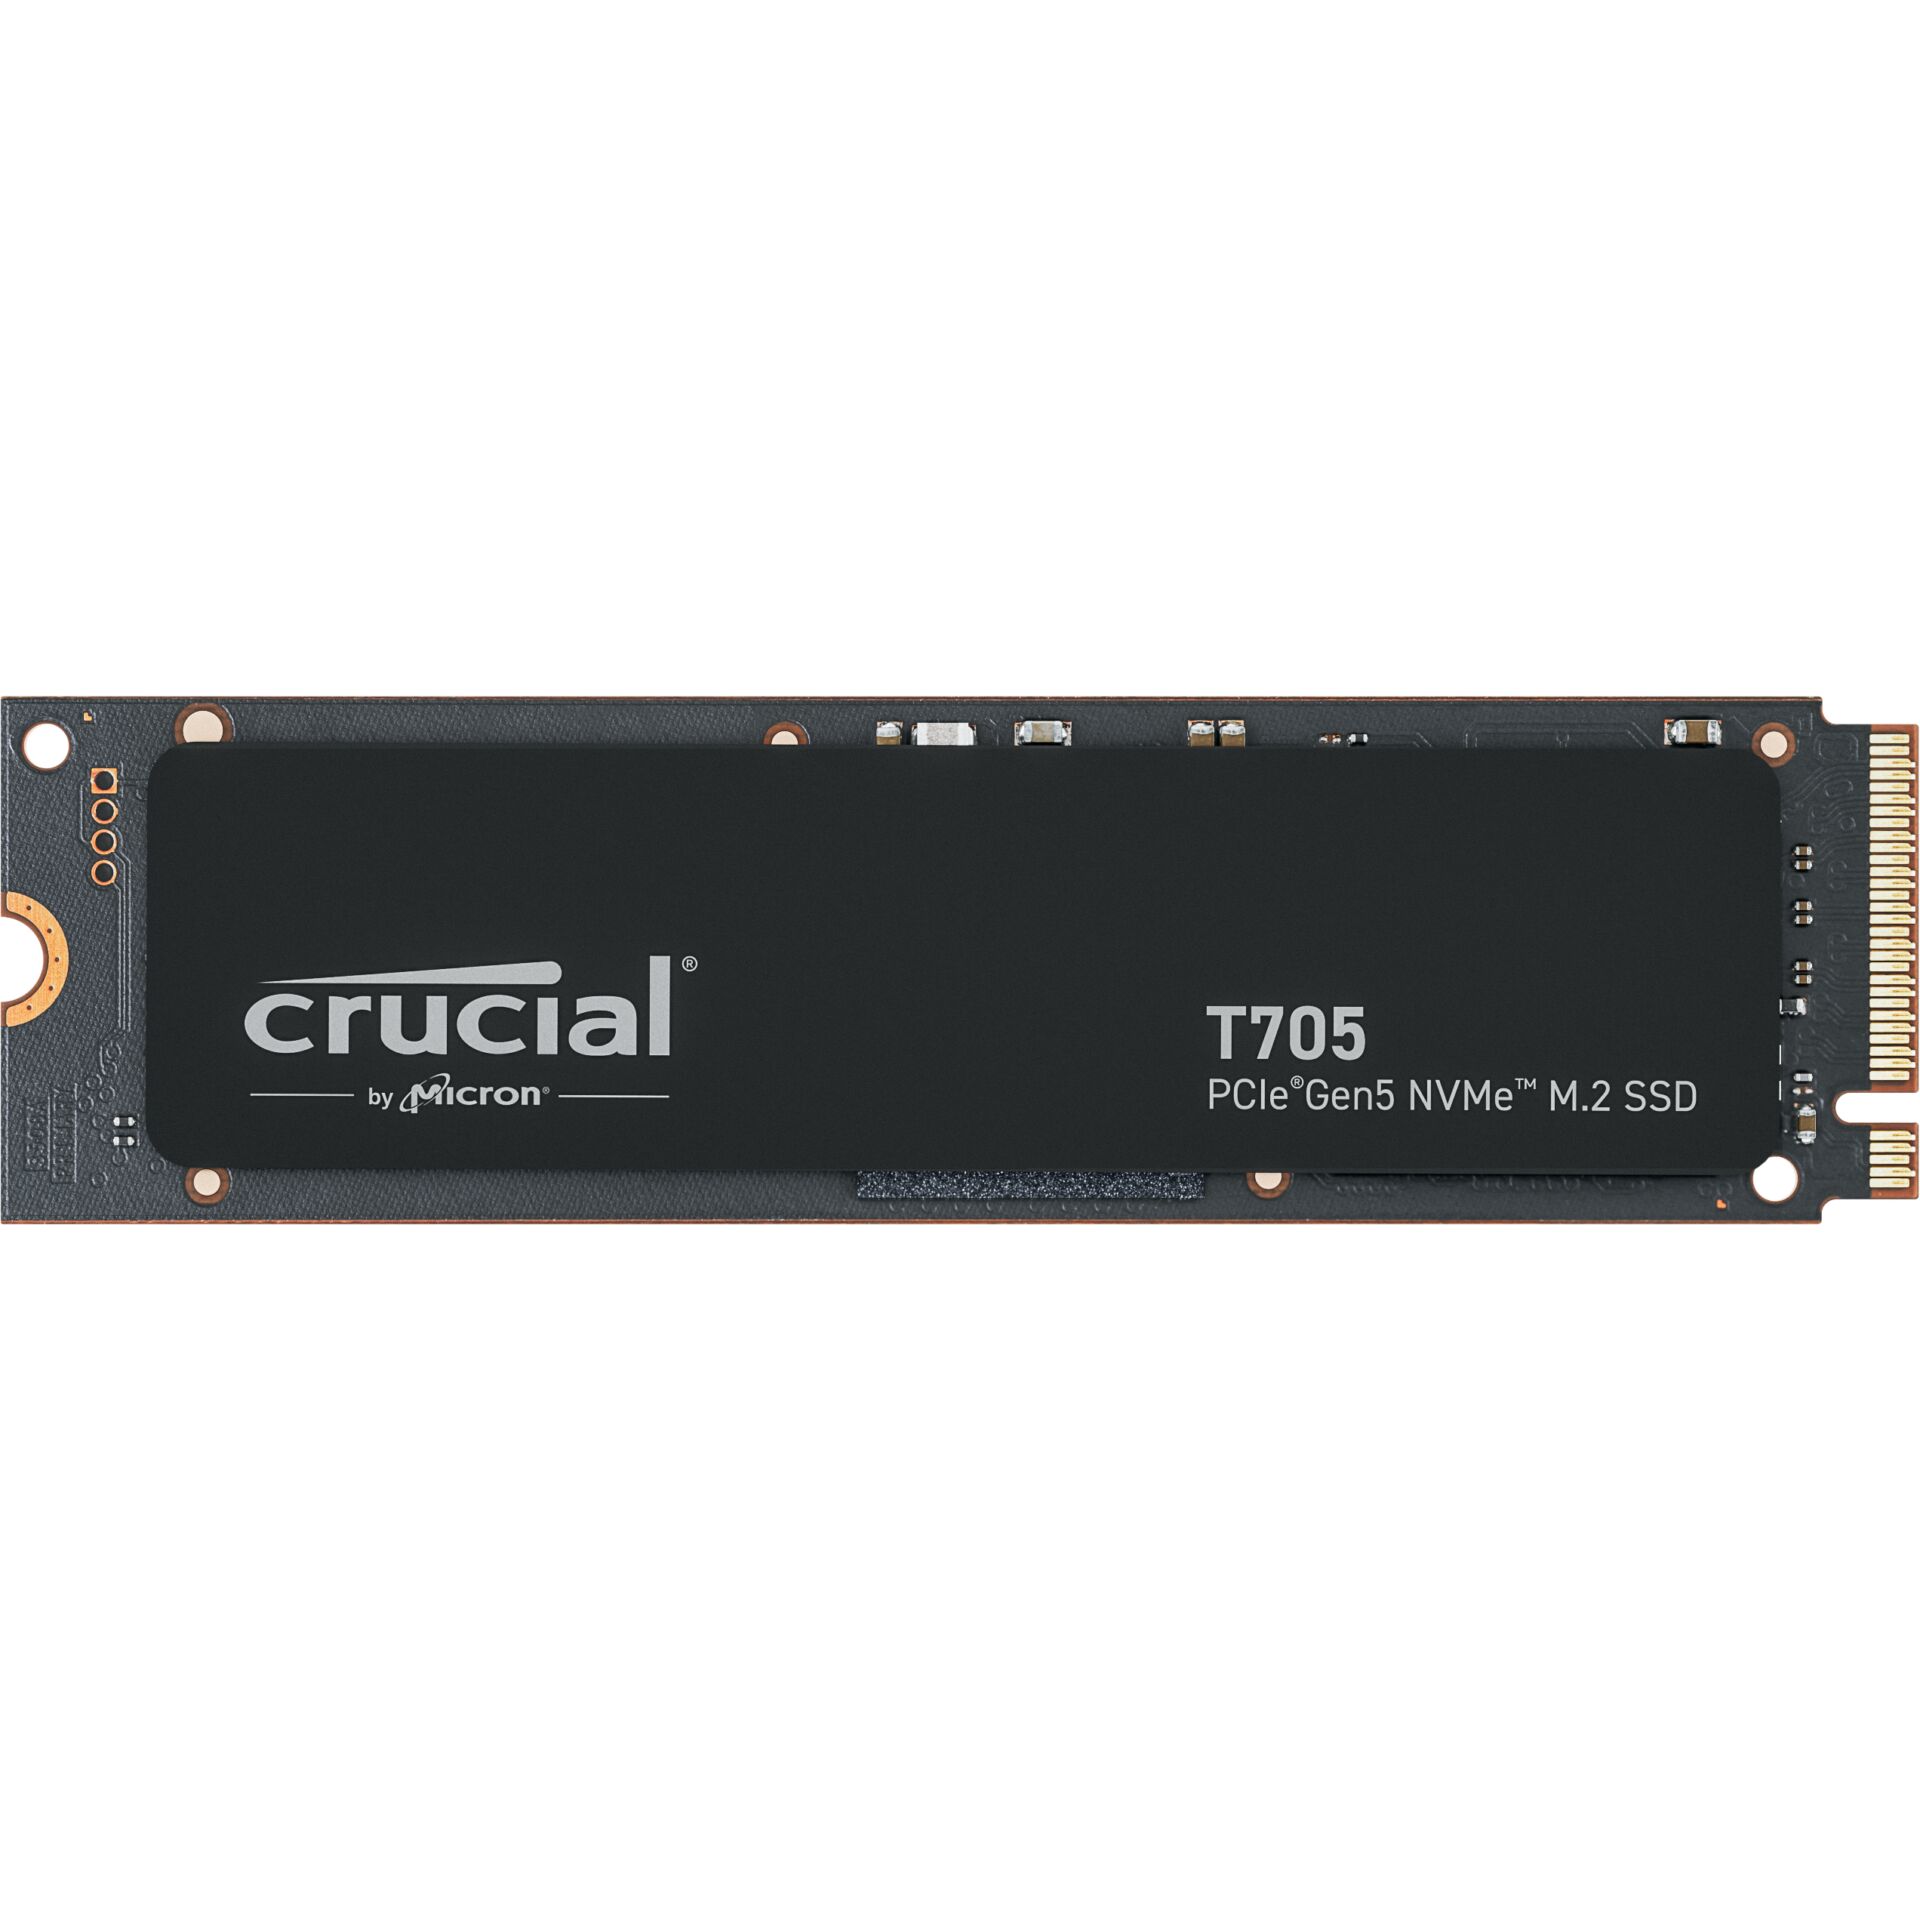 2.0 TB SSD Crucial T705 SSD, M.2/M-Key (PCIe 5.0 x4), lesen: 14500MB/s, schreiben: 12700MB/s SLC-Cached, TBW: 1.2P